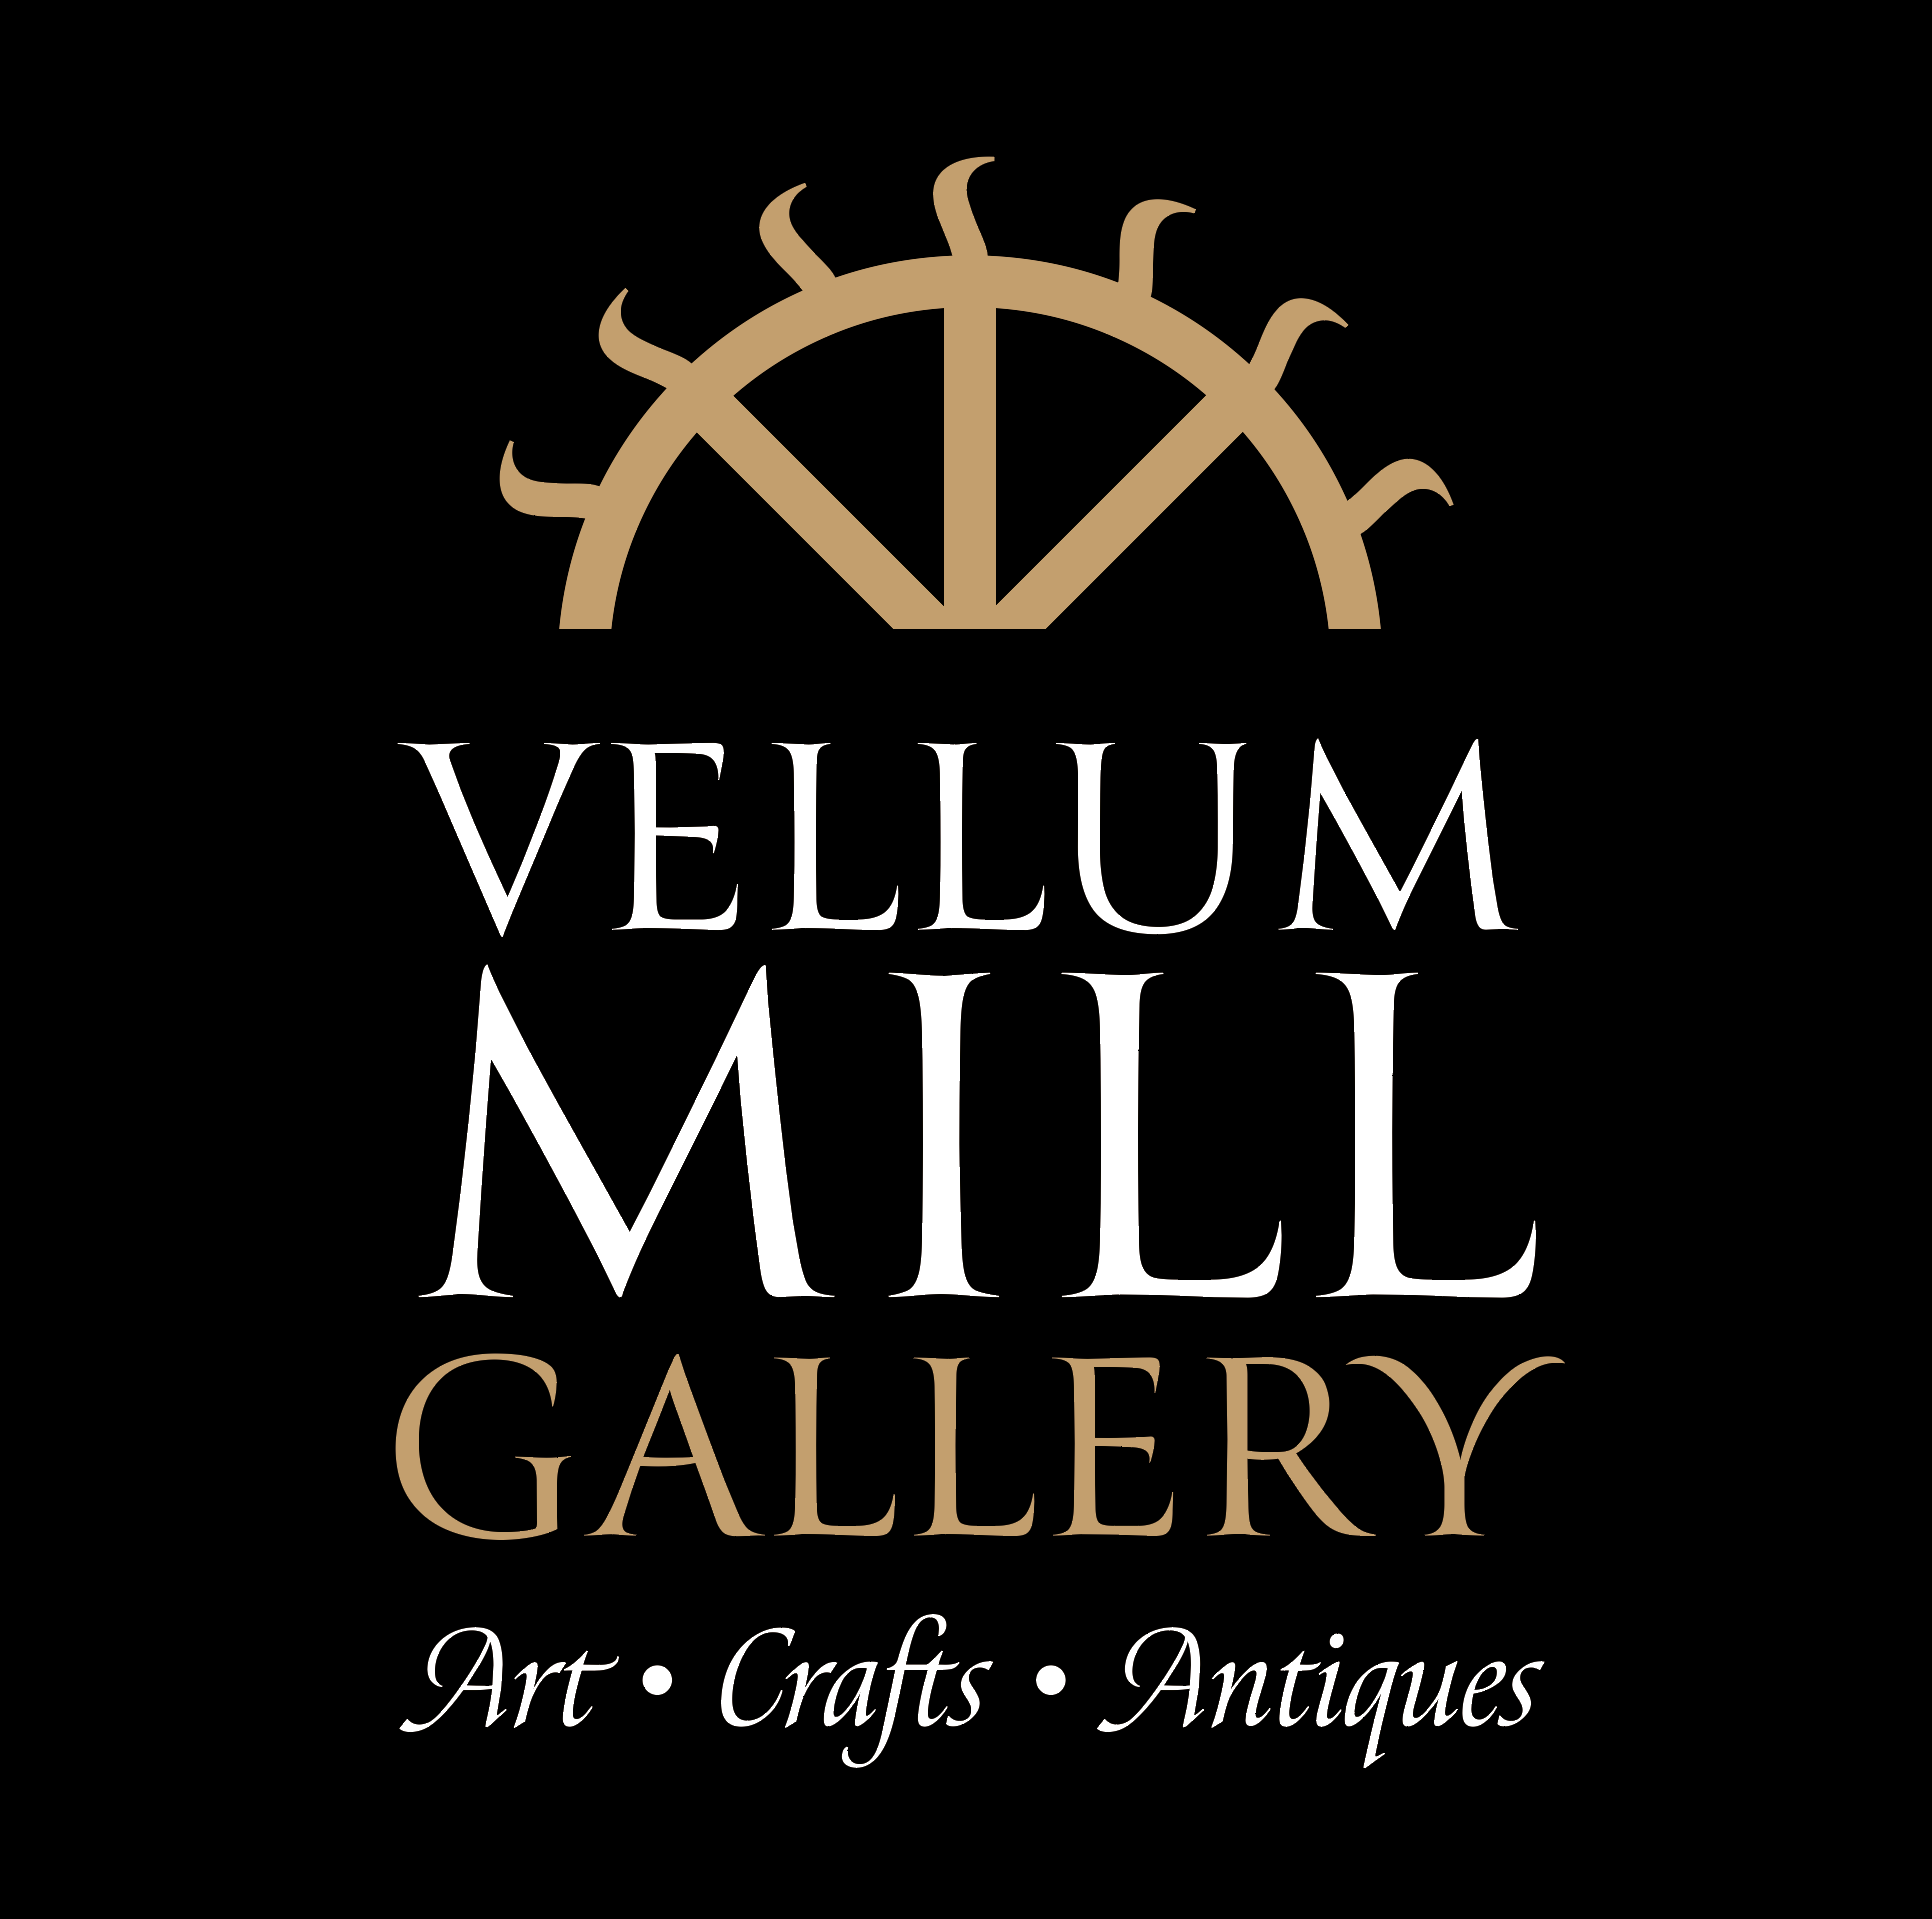 Vellum Mill Gallery – Art Gallery, Crafts and Antiques